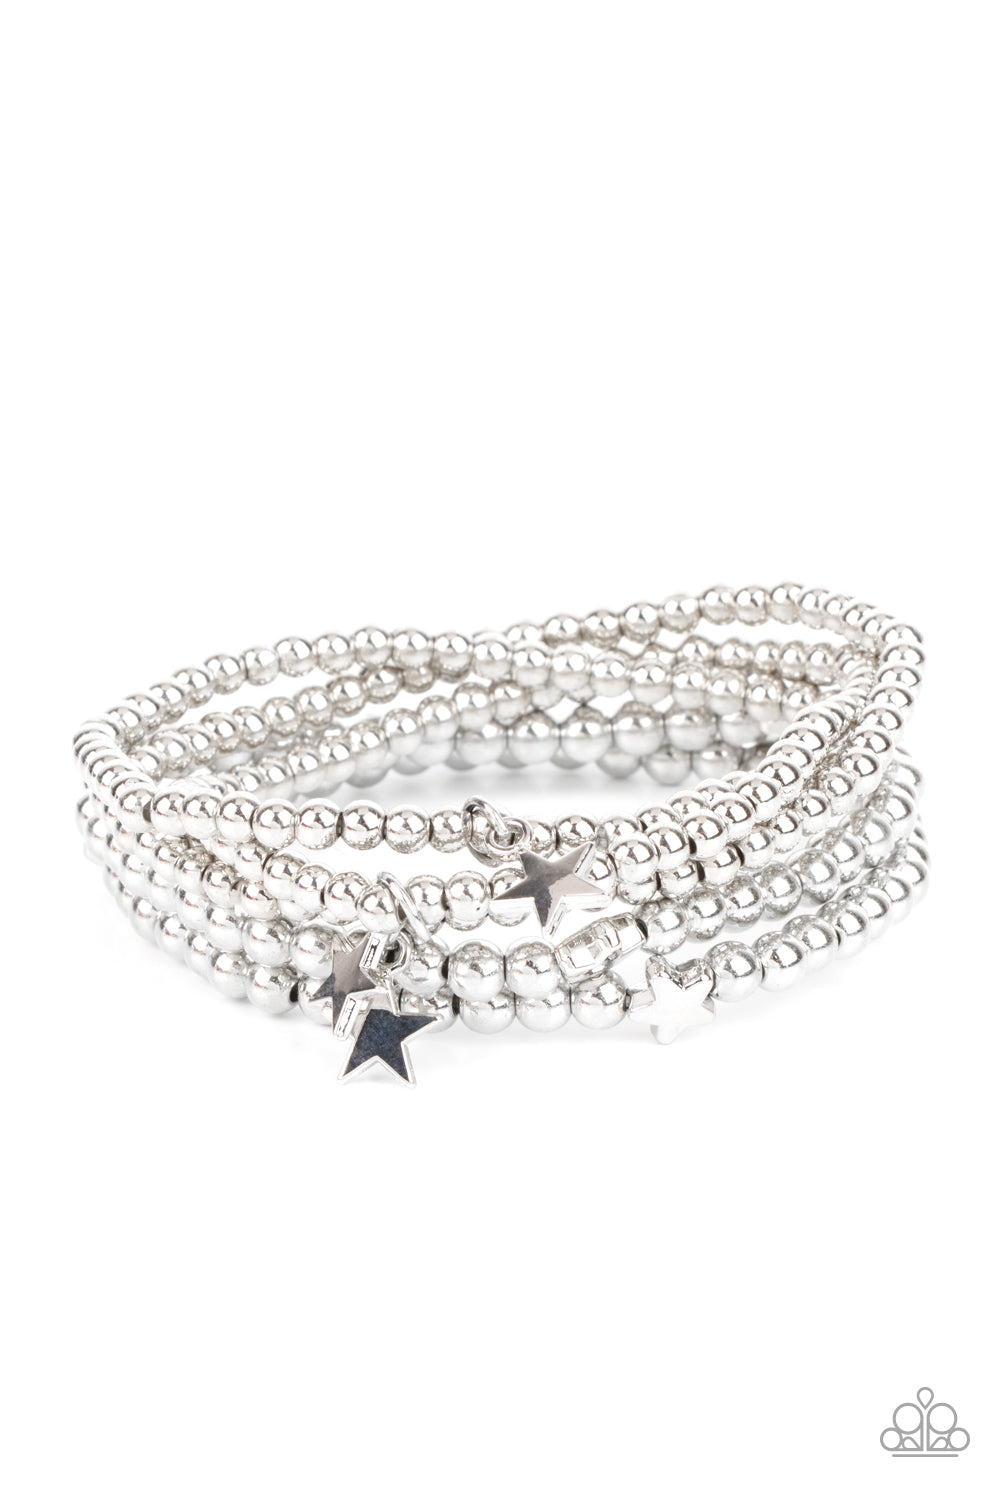 Paparazzi Accessories - American All-Star - Silver Bracelet